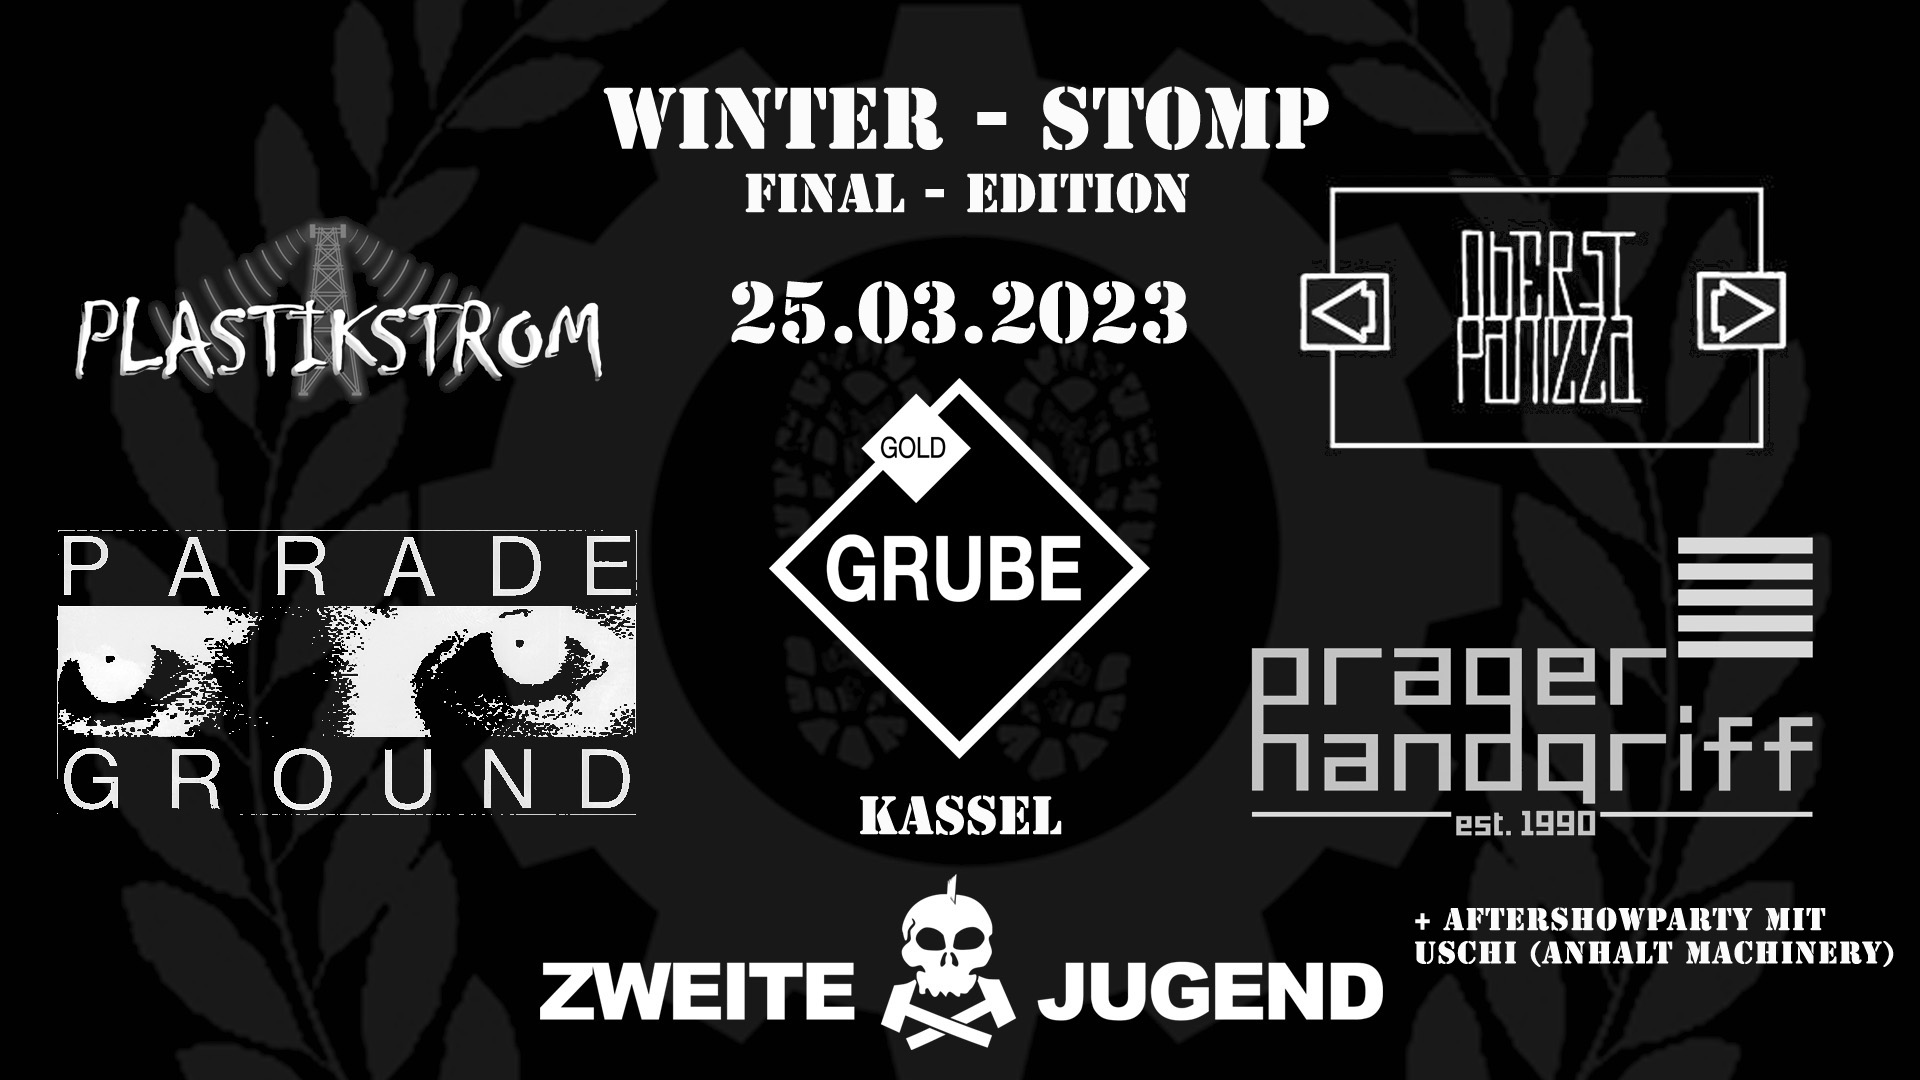 Featured image for “Winter Stomp – Final Edition, ein Danke”